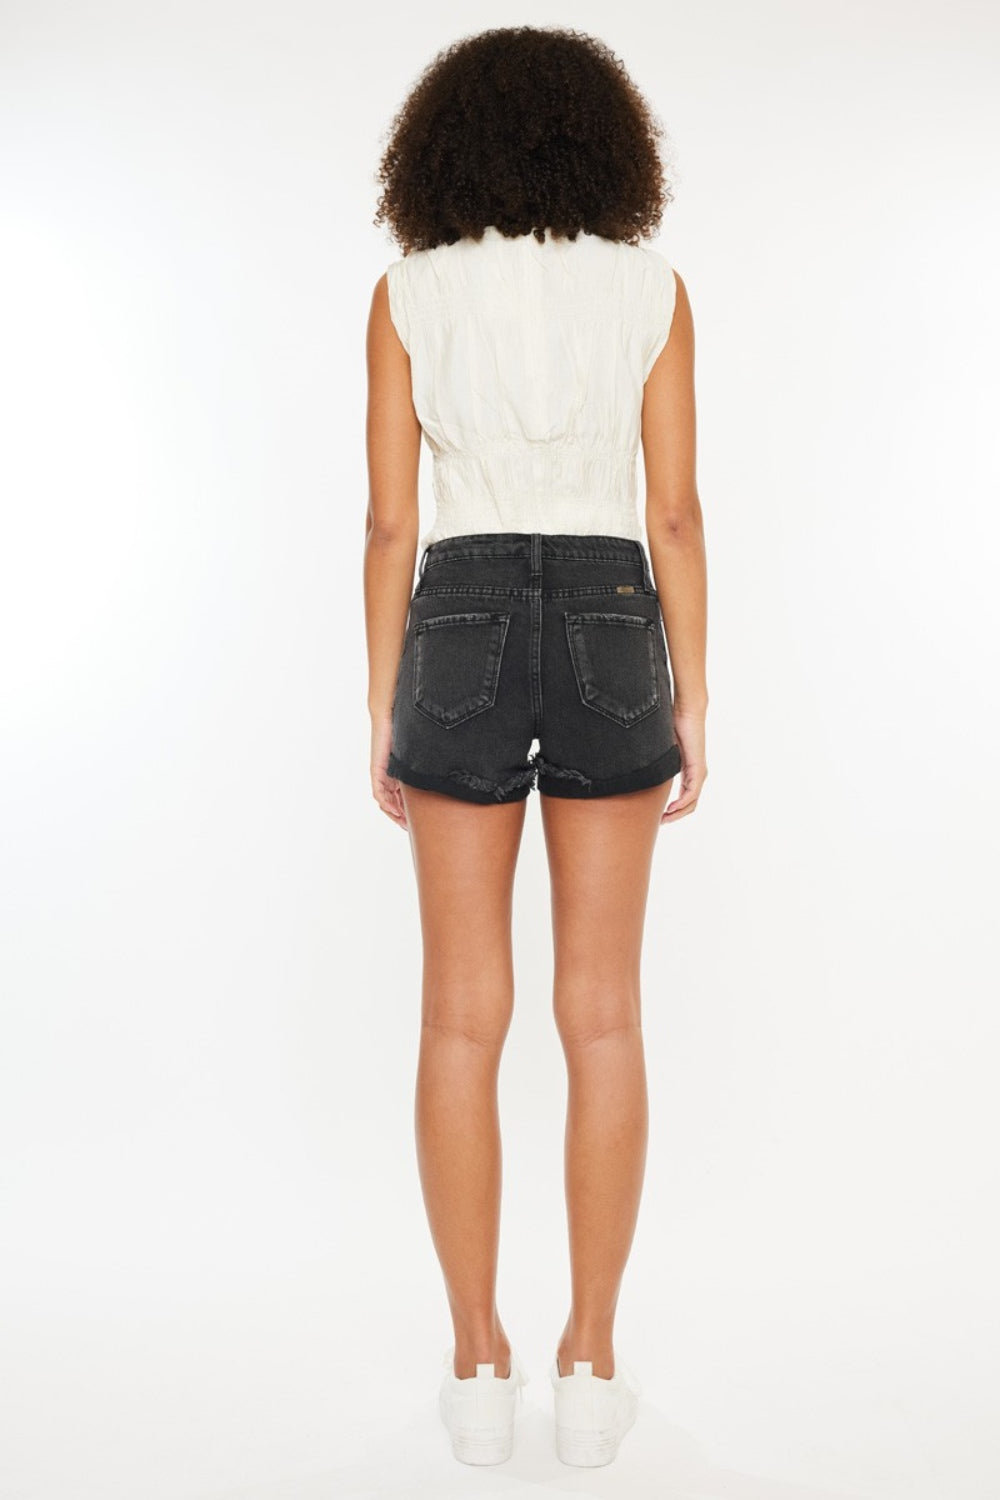 Kancan – Jeansshorts im Distressed-Look mit hoher Taille